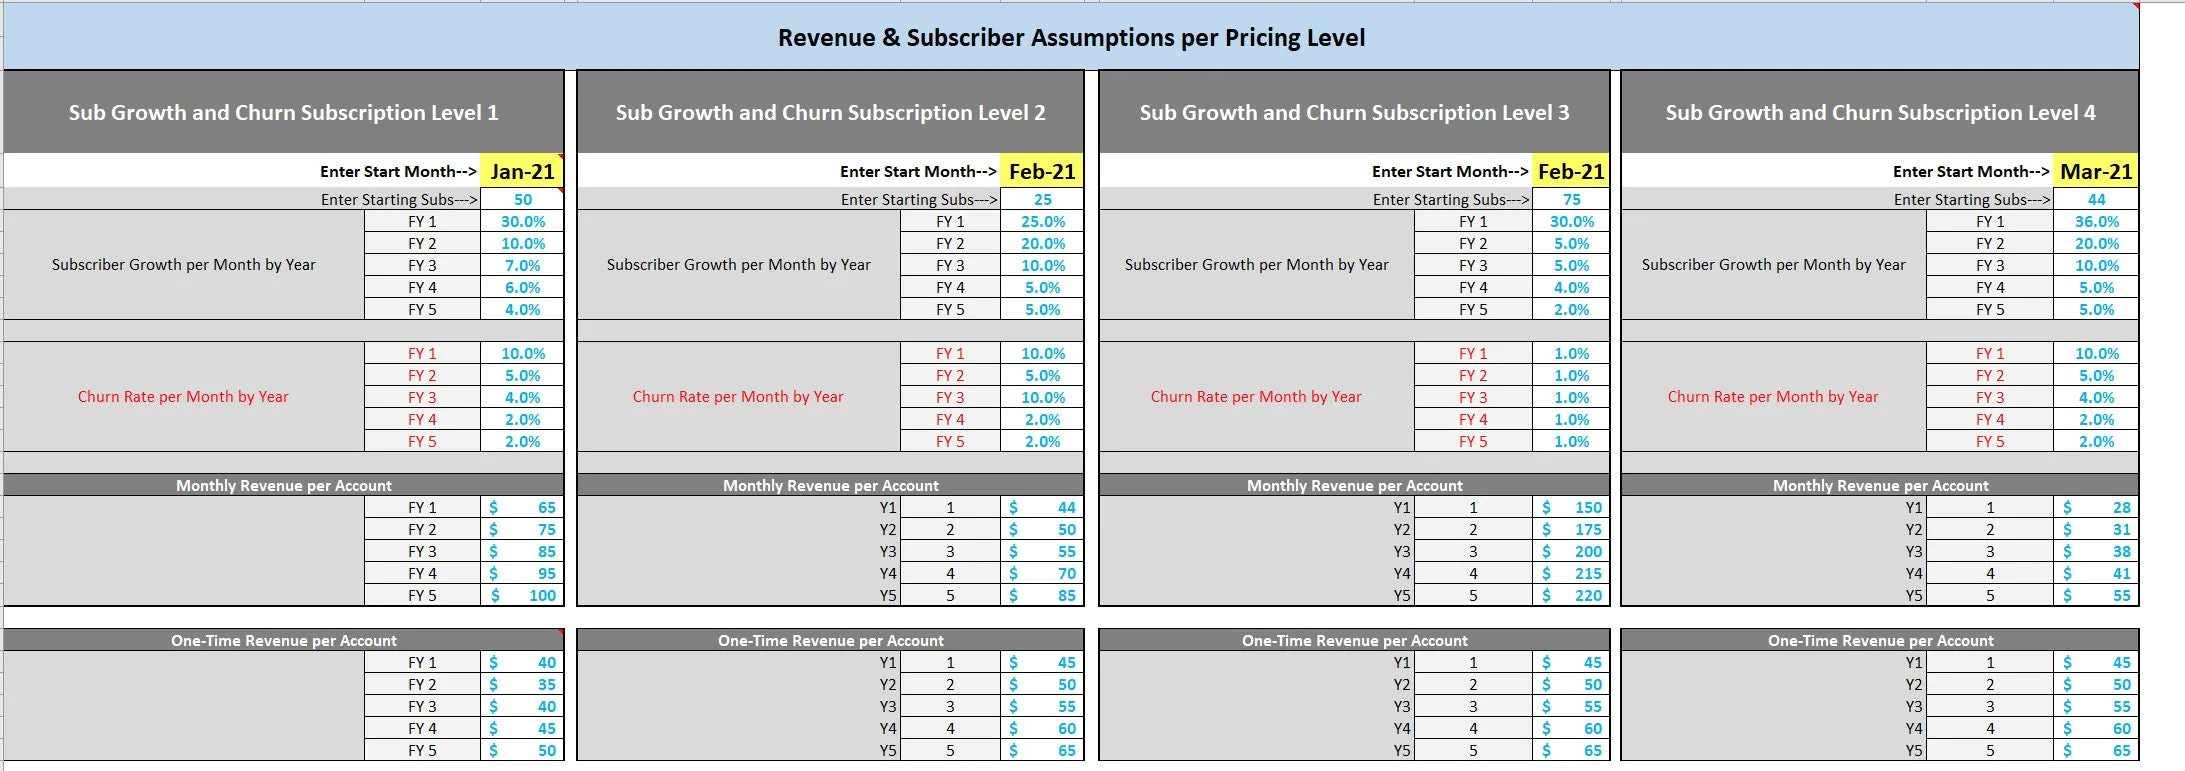 This is a partial preview of Basic SaaS Startup Model: 4 Pricing Tiers (Excel workbook (XLSX)). 